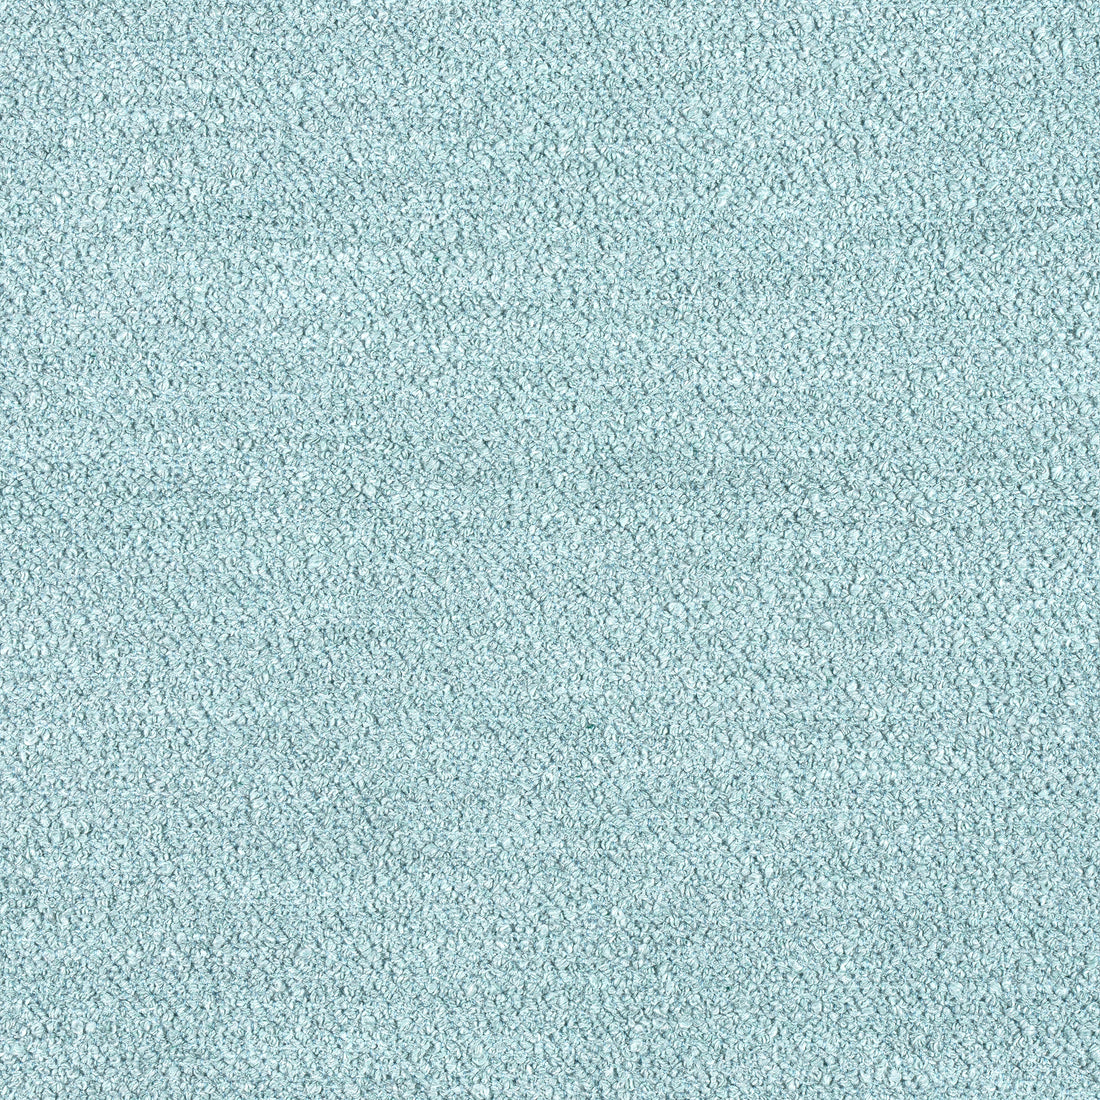 Capra fabric in seafoam color - pattern number W8592 - by Thibaut in the Villa Textures collection